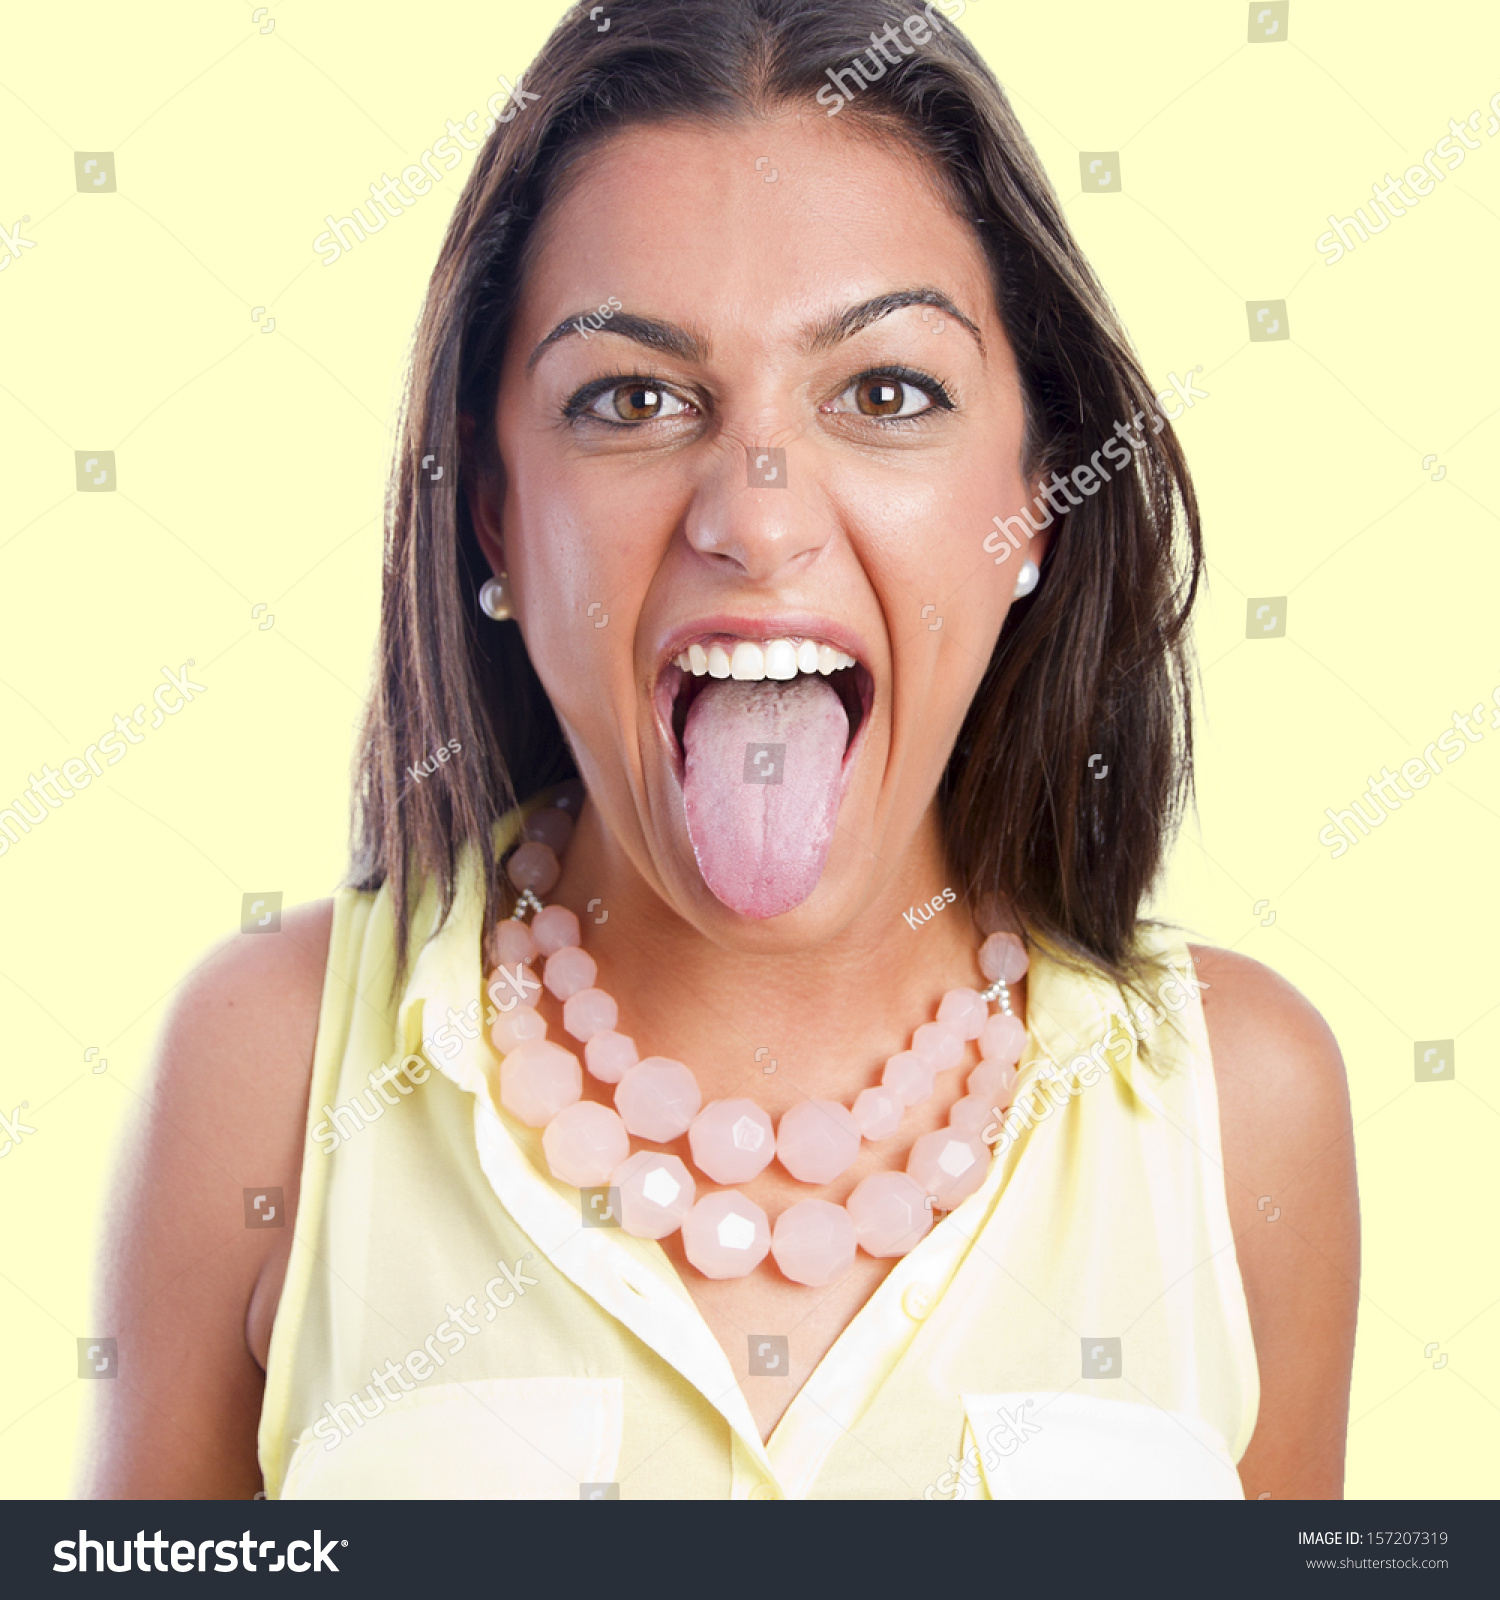 Pretty Woman Showing Her Tongue Stock Photo (Royalty Free) 157207319 ...